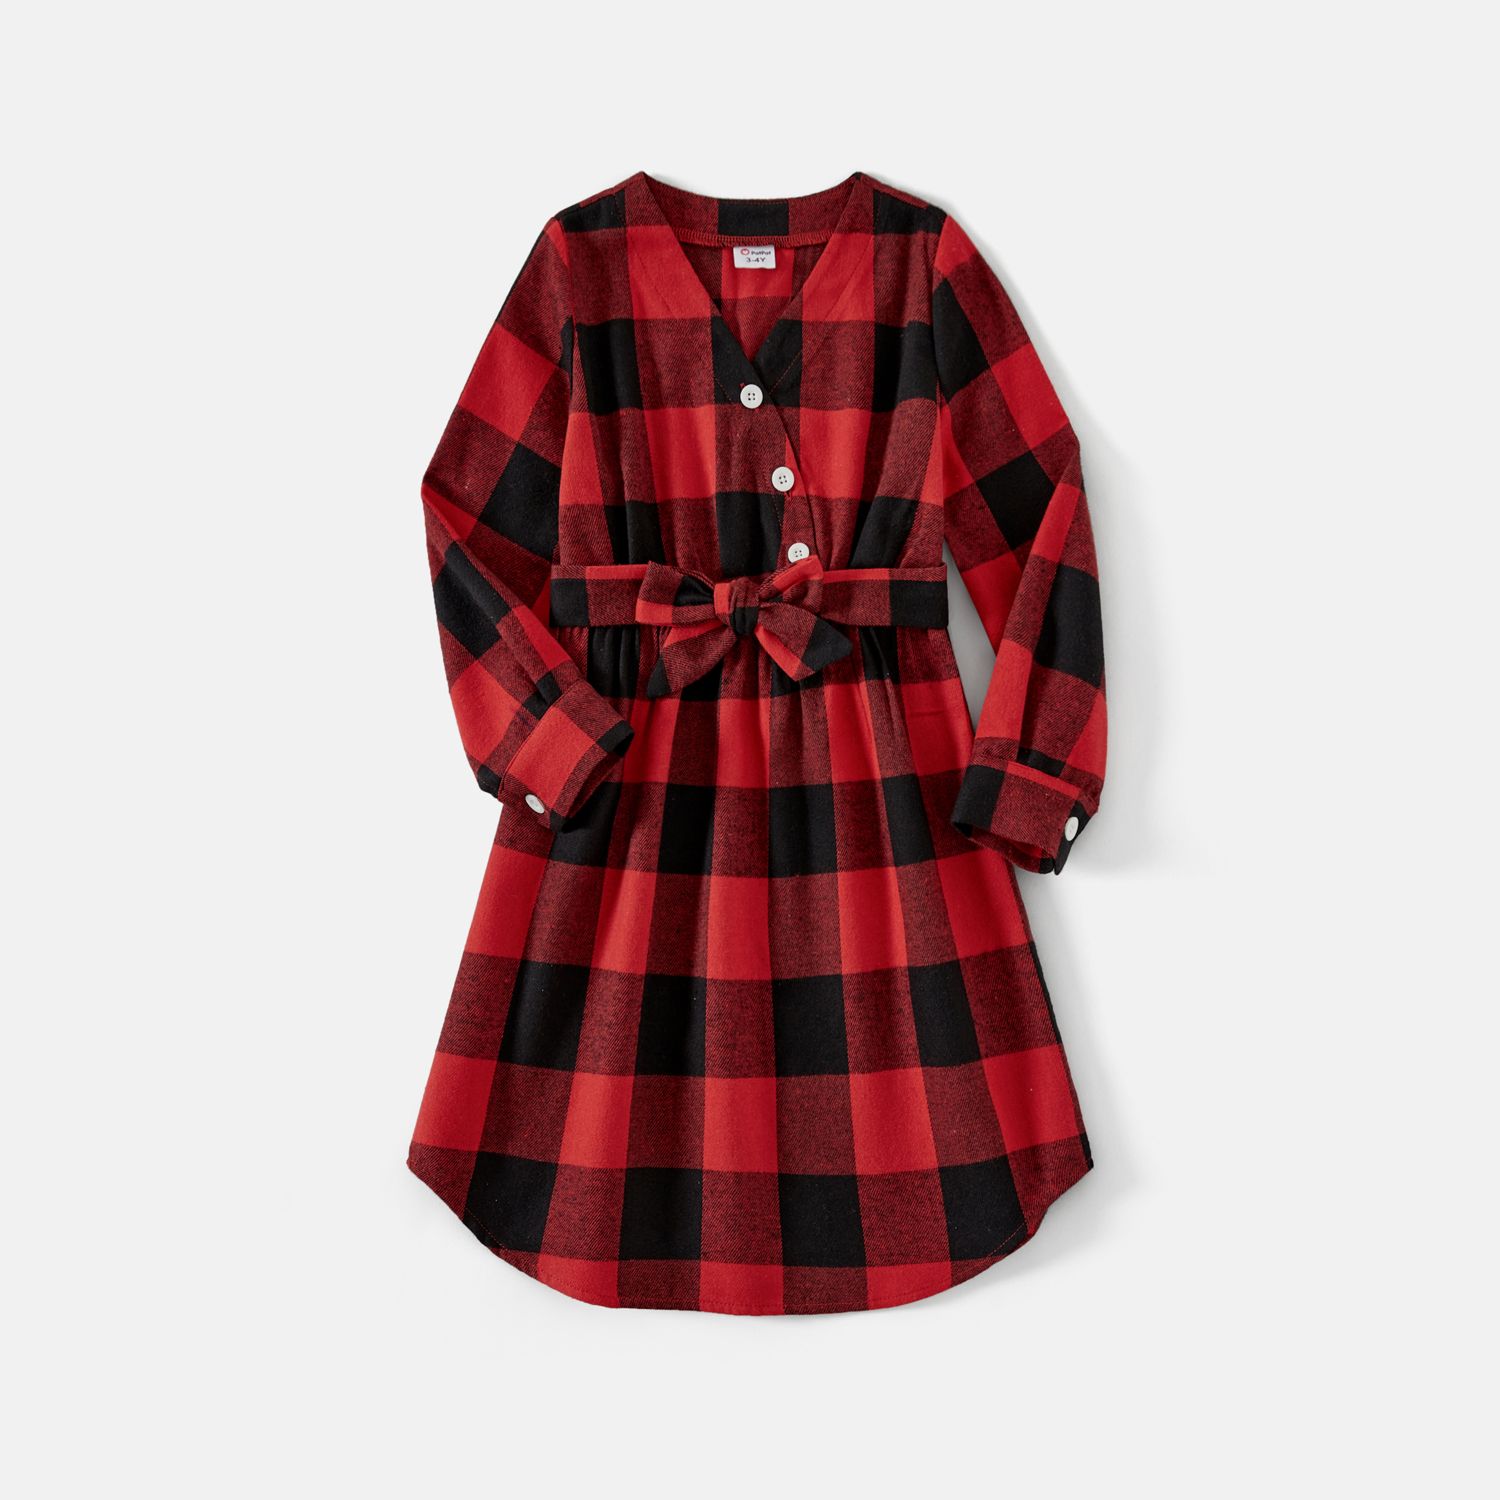 Family Matching Red And Black Plaid Long-sleeve  Shirts And Belted Dresses Sets